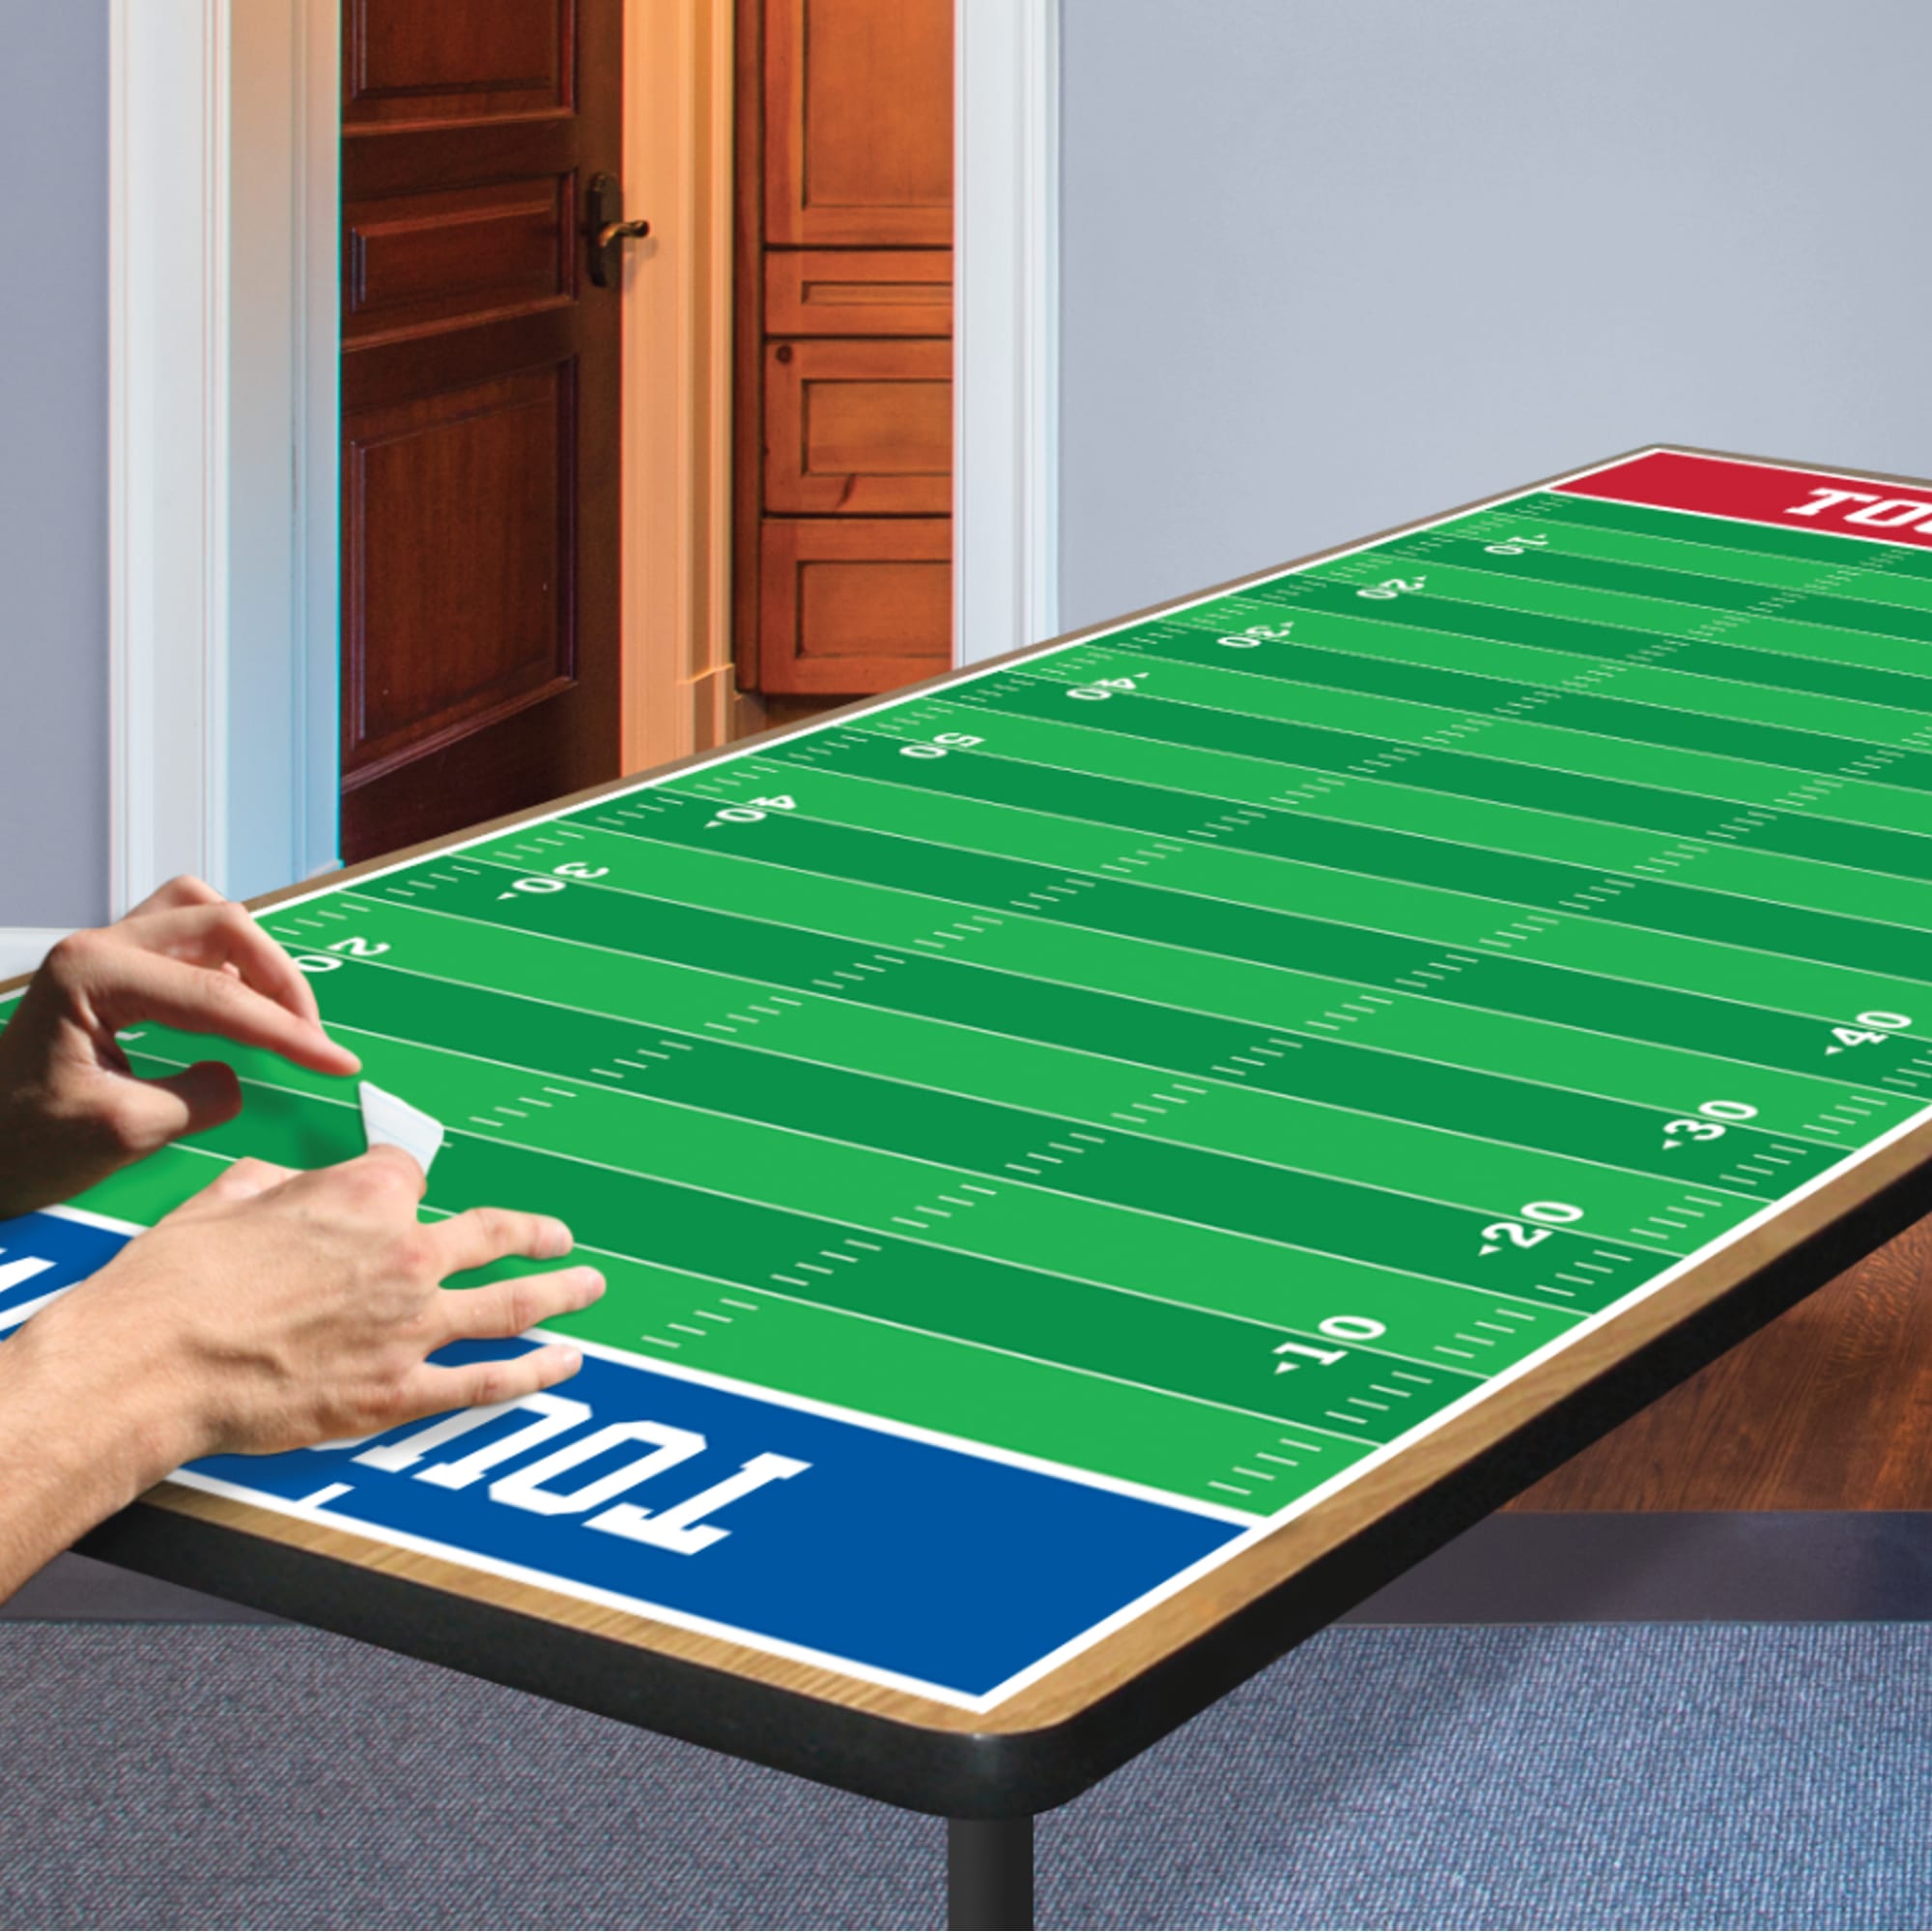 Tabletop Paper Football Field - Removable Dry Erase Vinyl Decal 48.0"W x 23.5"H by Fathead